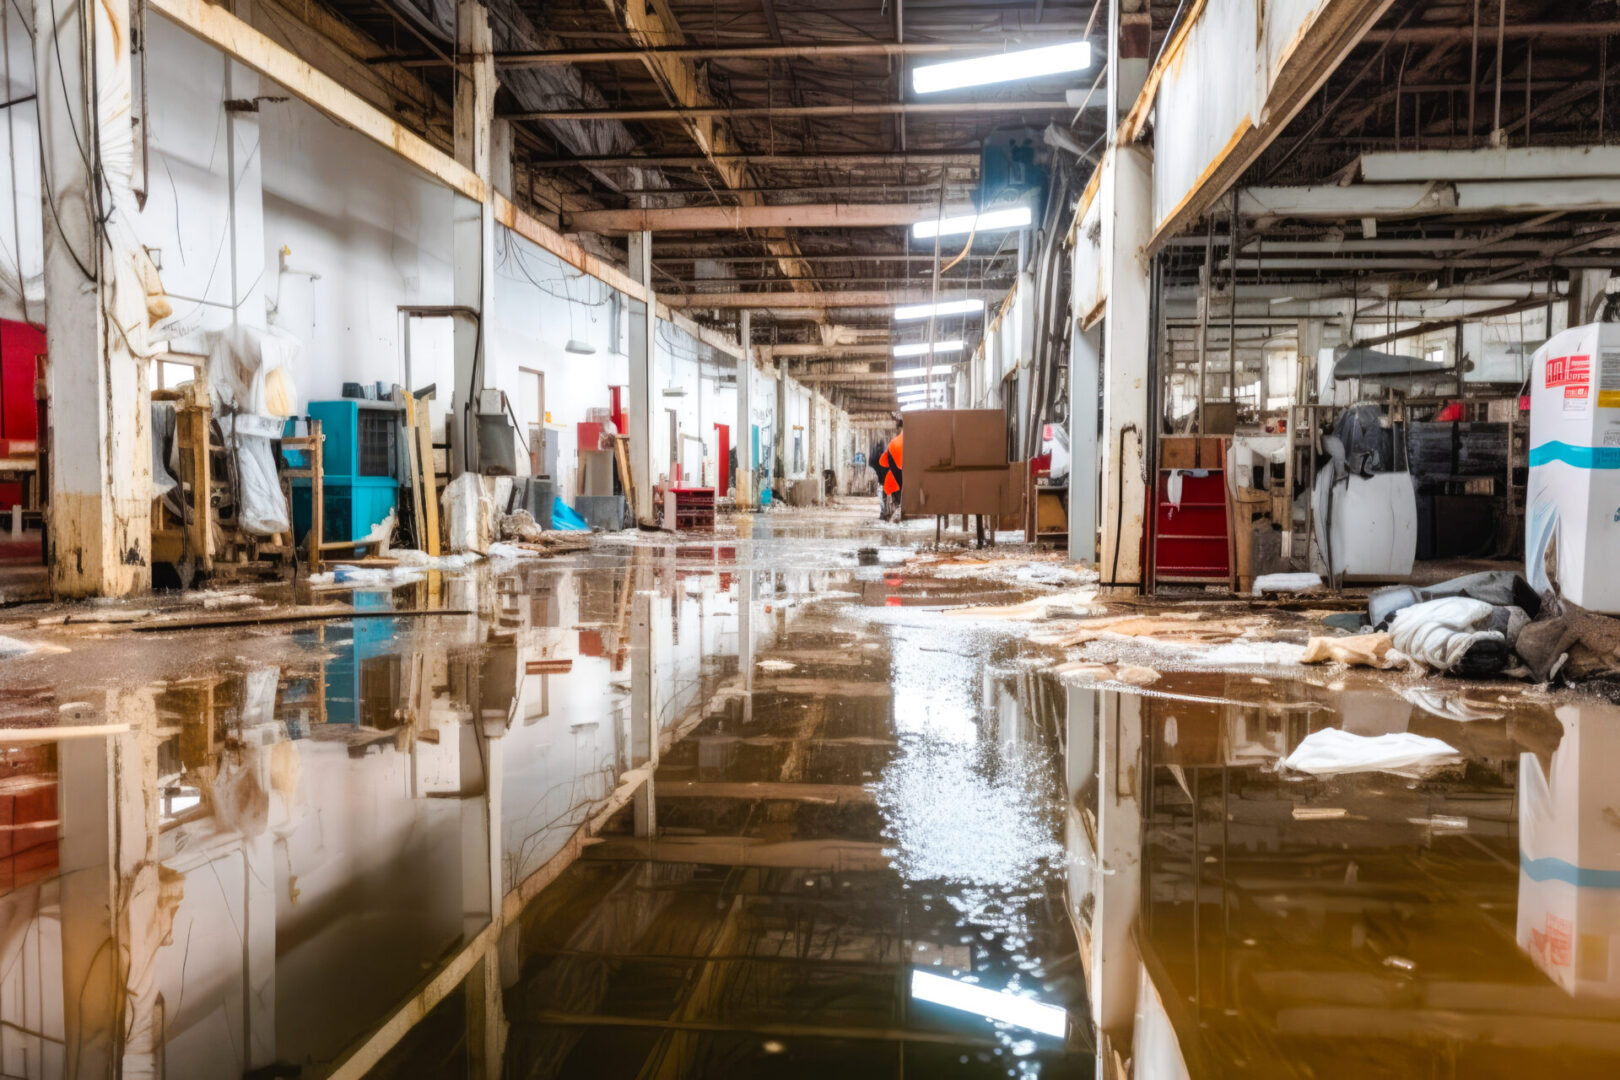 A warehouse with water on the floor and floors flooded.